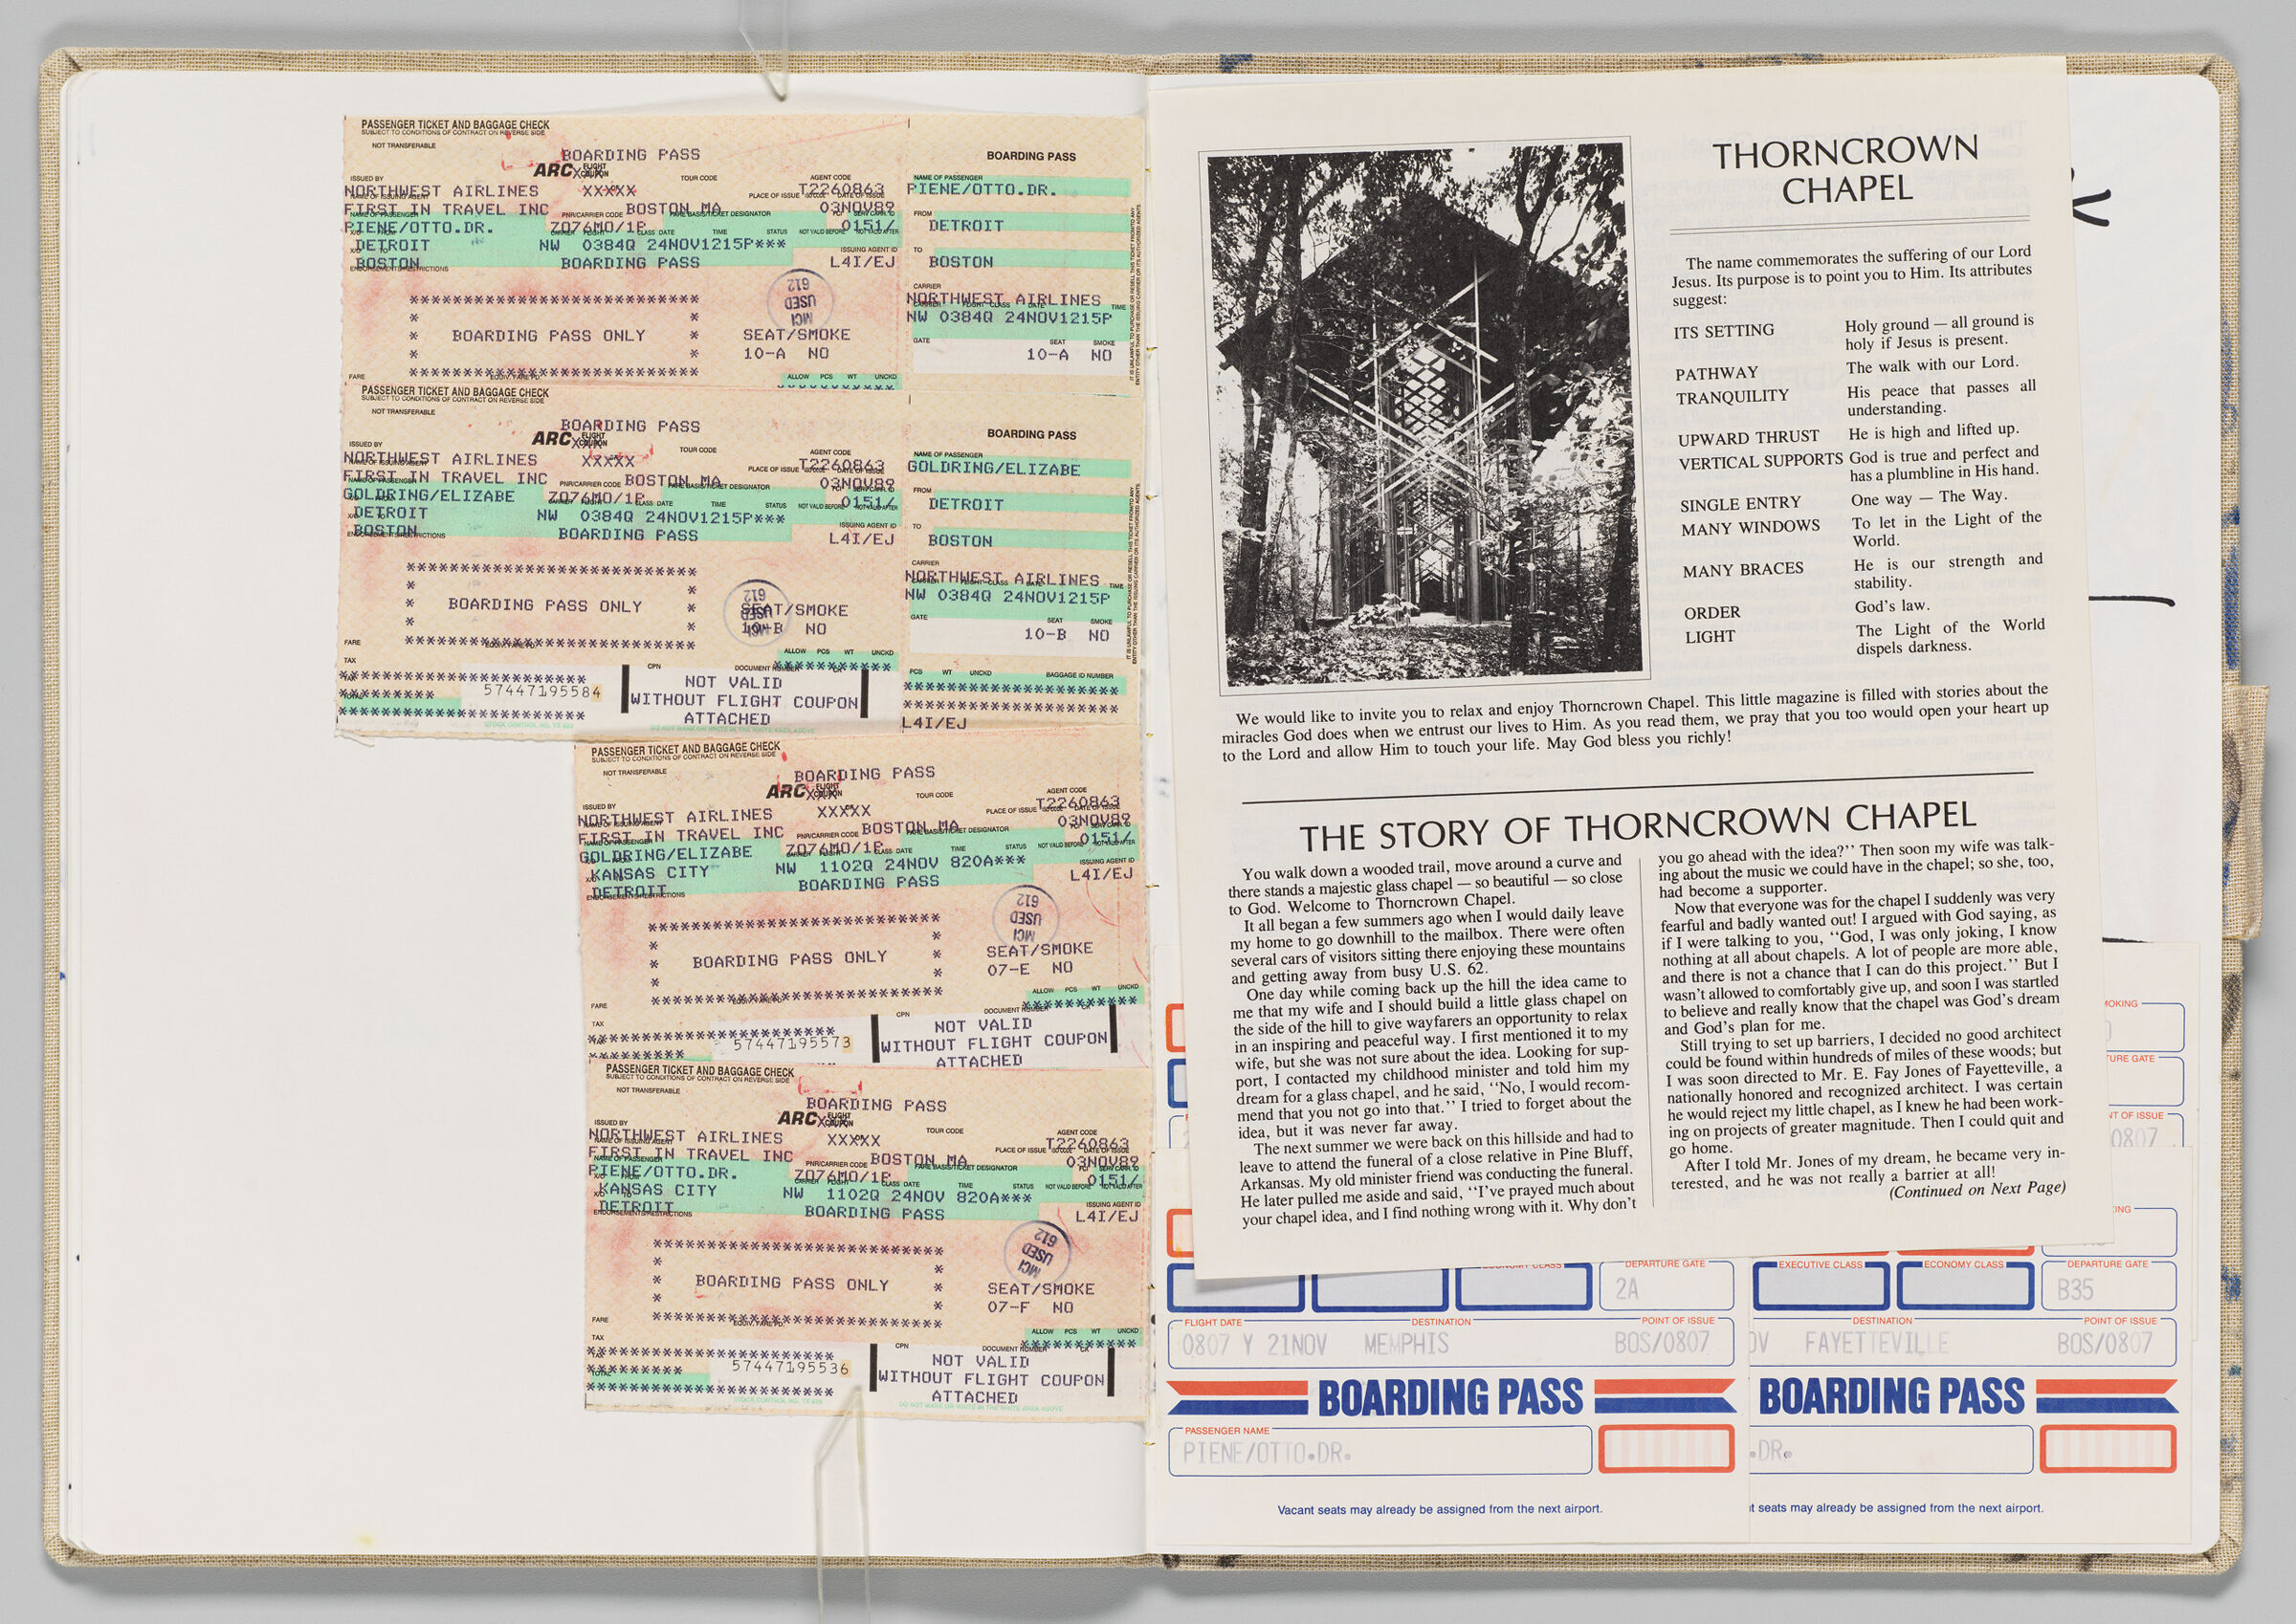 Untitled (Bleed-Through Of Previous Page, Left Page); Untitled (Notes With Adhered Northwest Airlines Boarding Passes And Thorncrown Pamplet, Right Page)